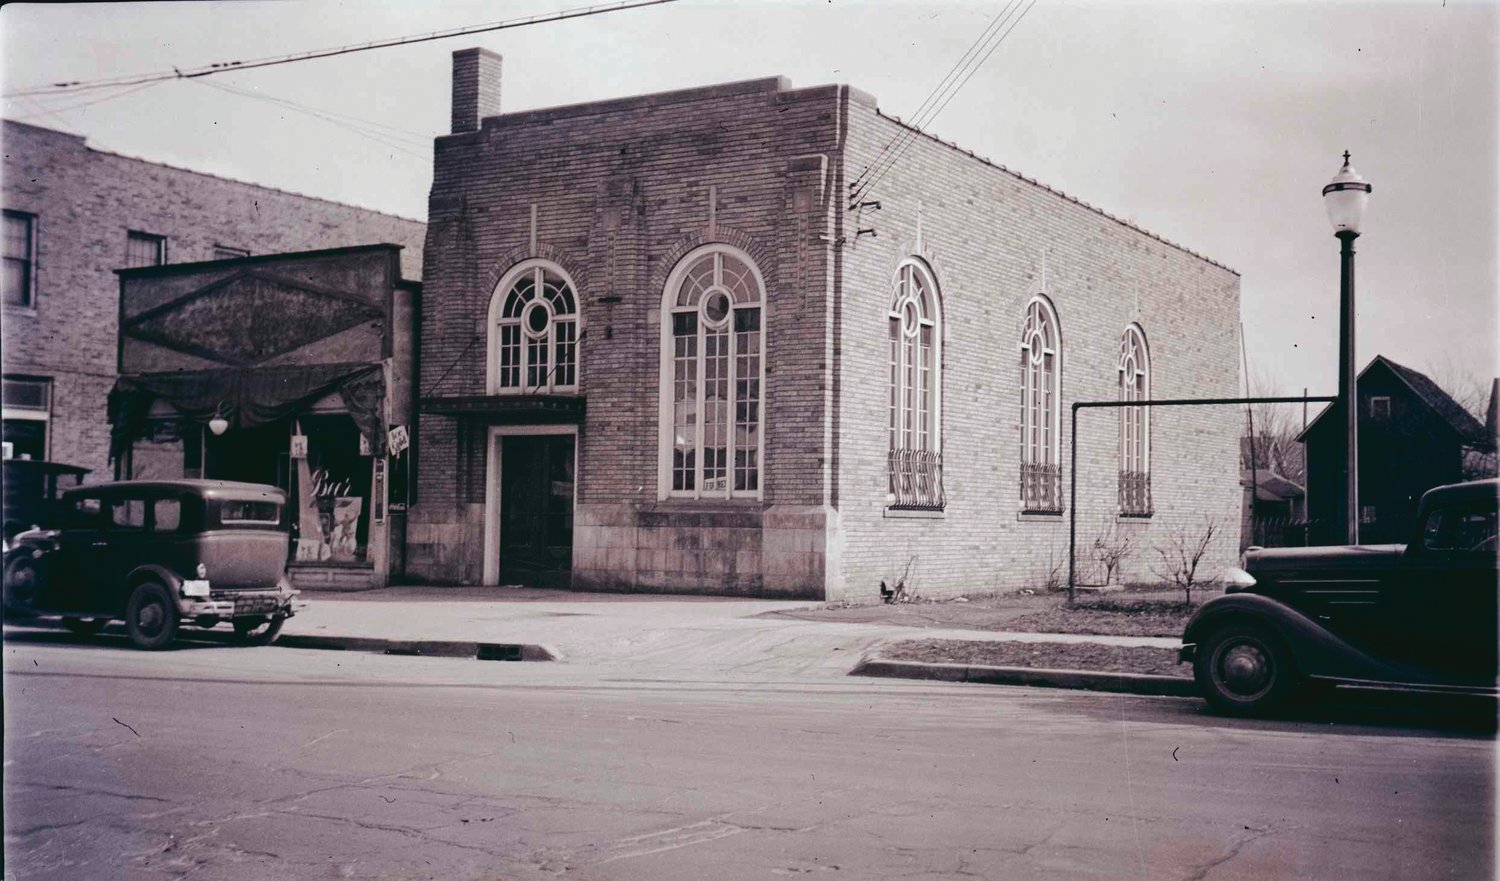 A tavern, later a pharmacy and again a tavern, at 909 W. Saginaw Ave. and the bank at 913 W. Saginaw St., as they looked in 1940. Both buildings were renovated by Aaron Williams. The former bank is a roastery for the Strange Matter Coffee and the other is up for sale.